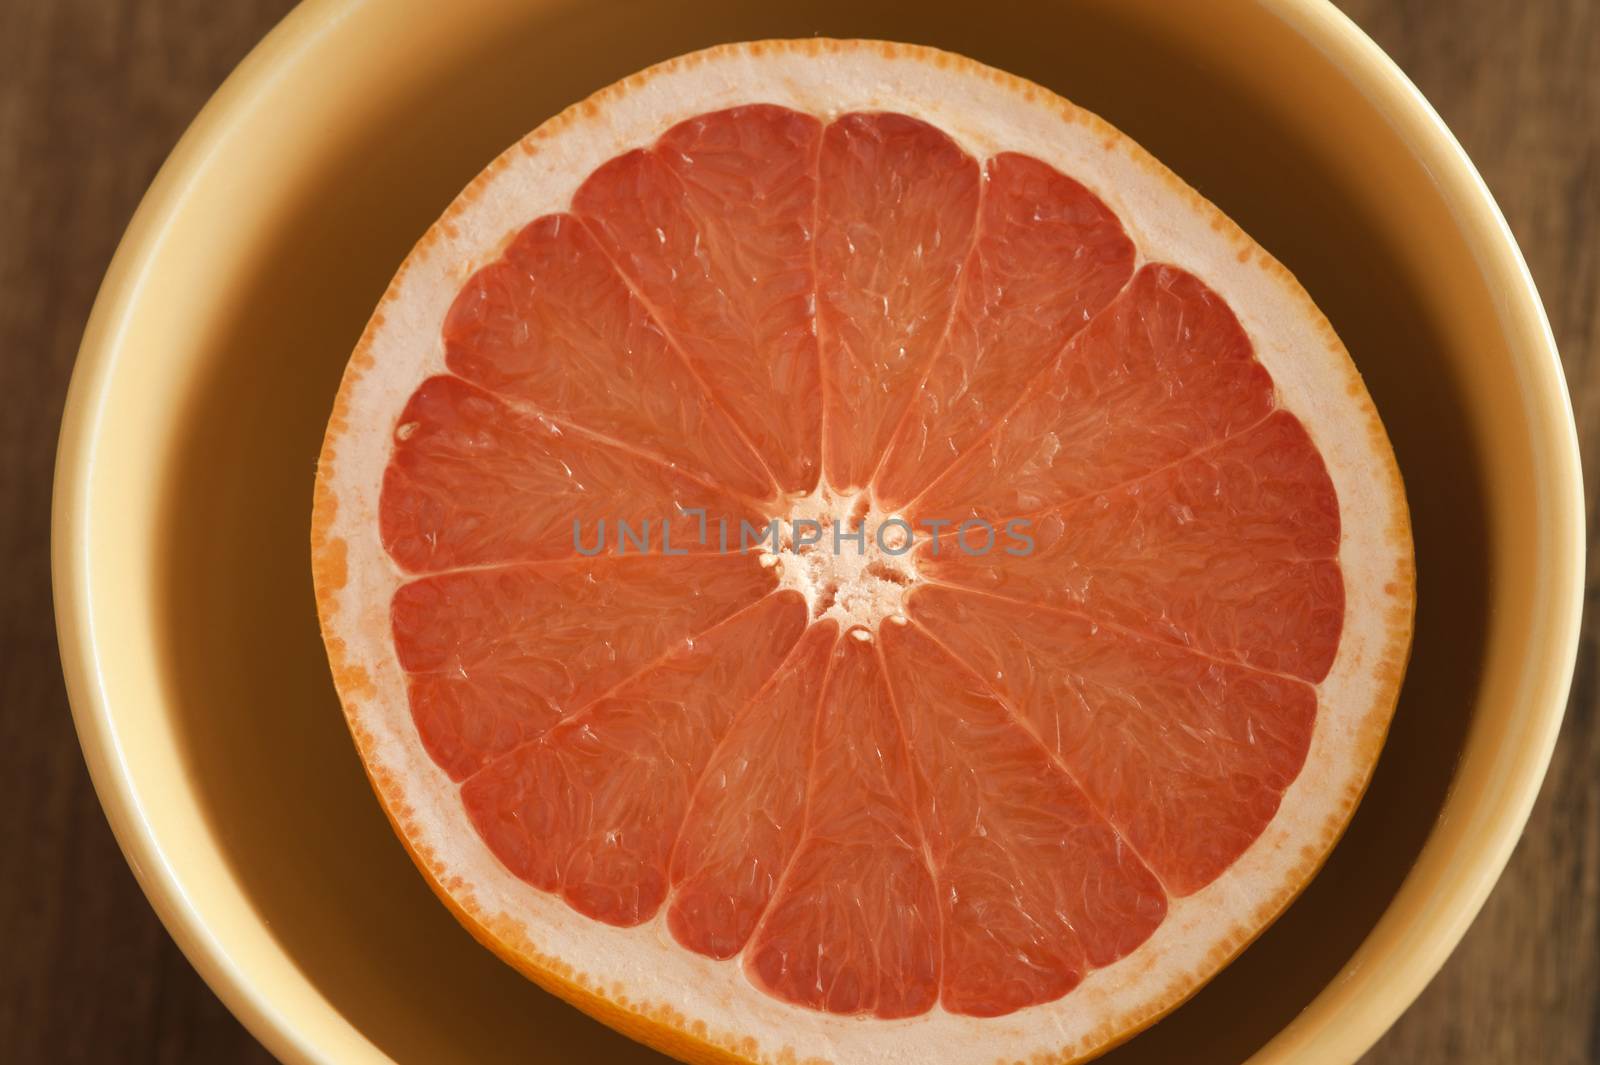 Fresh pink grapefruit half served in a bowl for breakfast viewed from overhead in a healthy diet concept